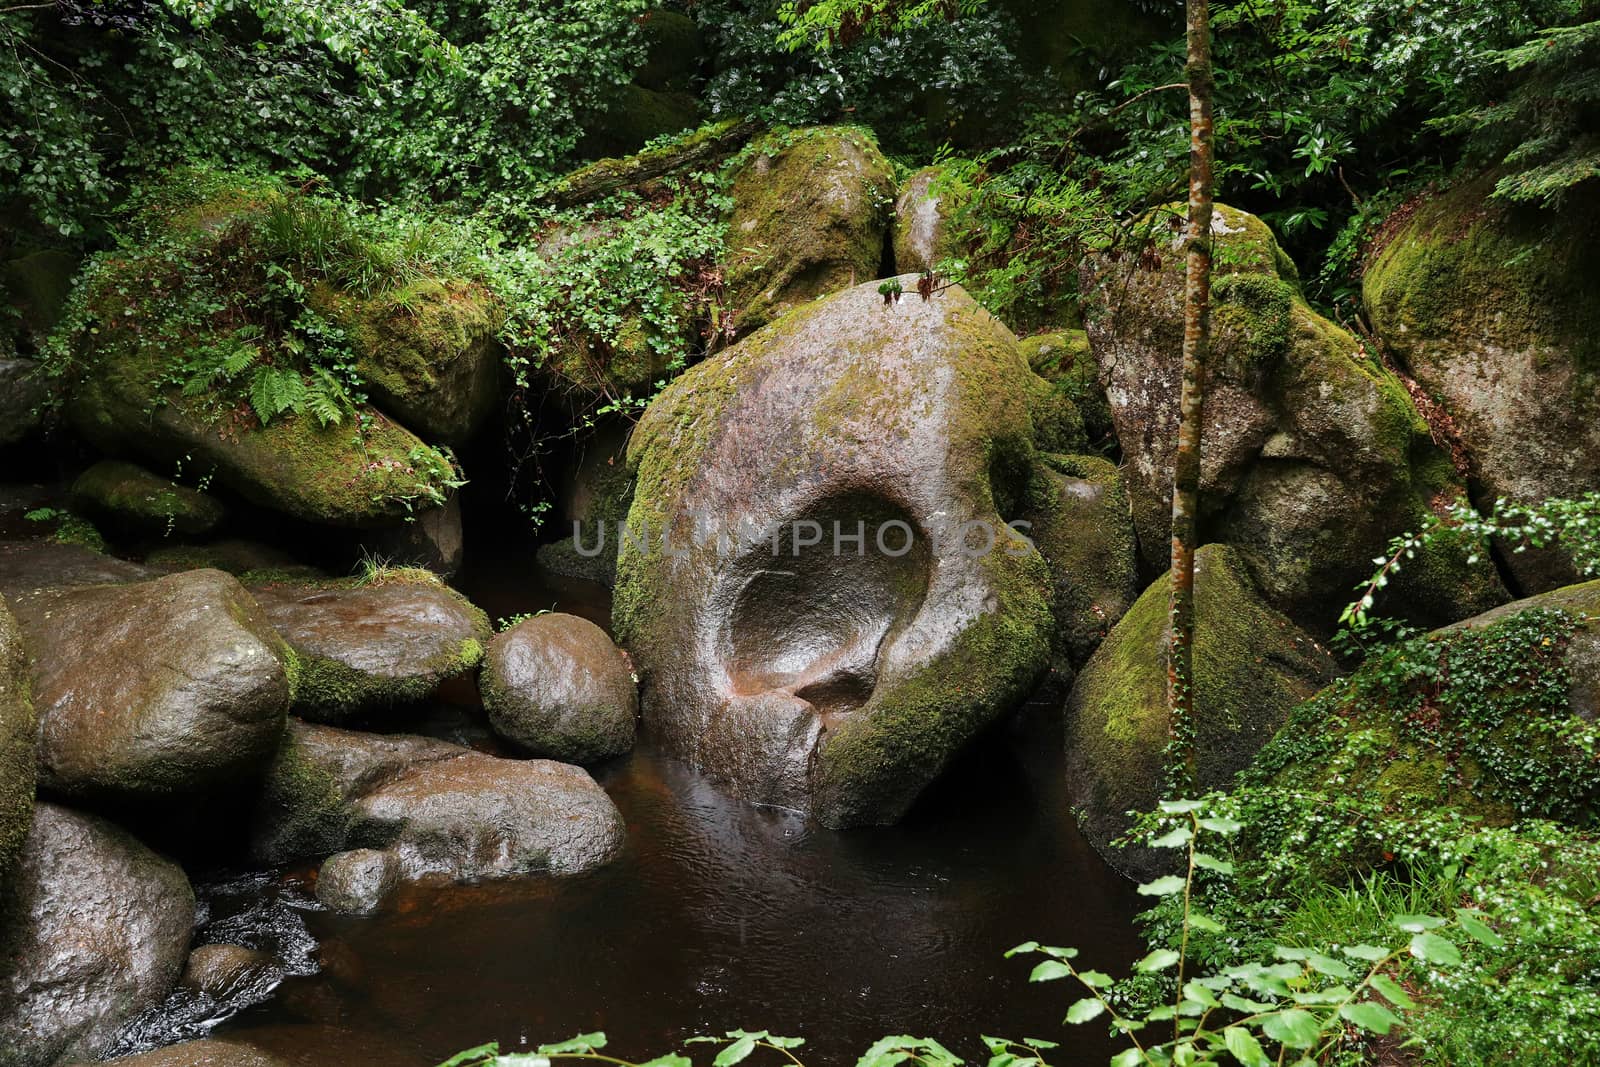 Bizarre boulders in the Huelgoat forest, Brittany by Mibuch